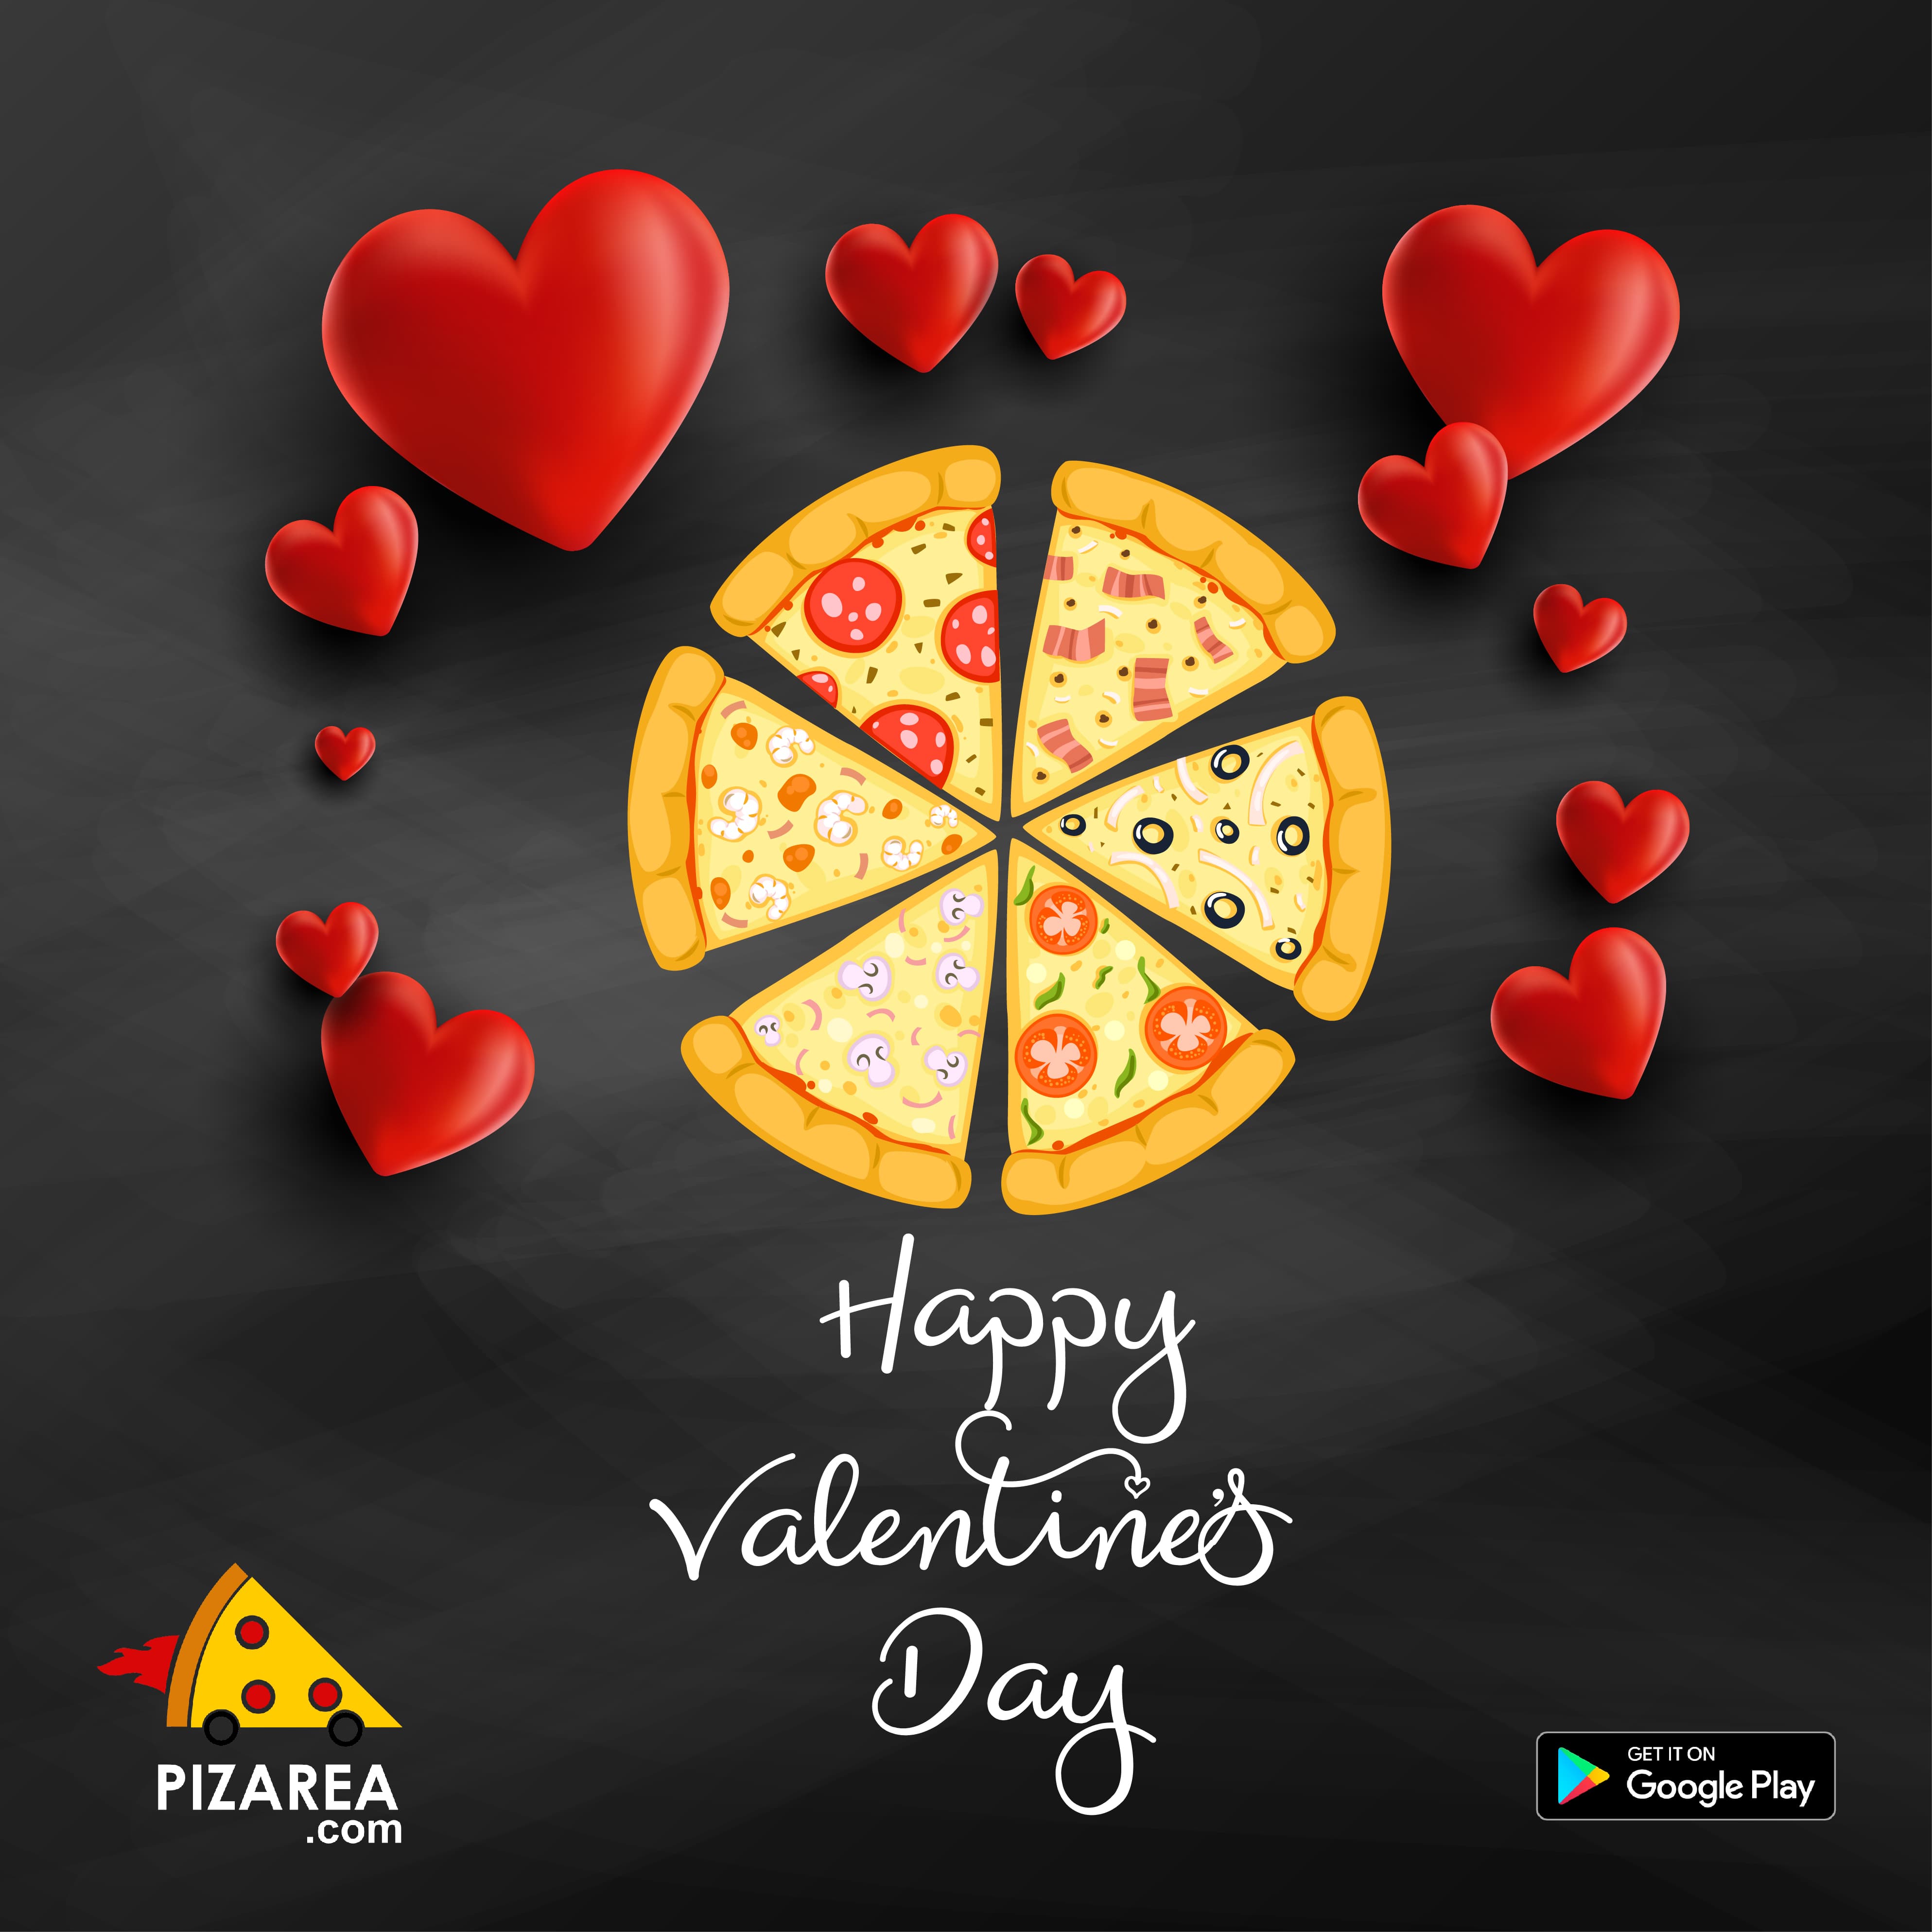 Pizarea Saves Valentine's day!  Order food online with Pizarea